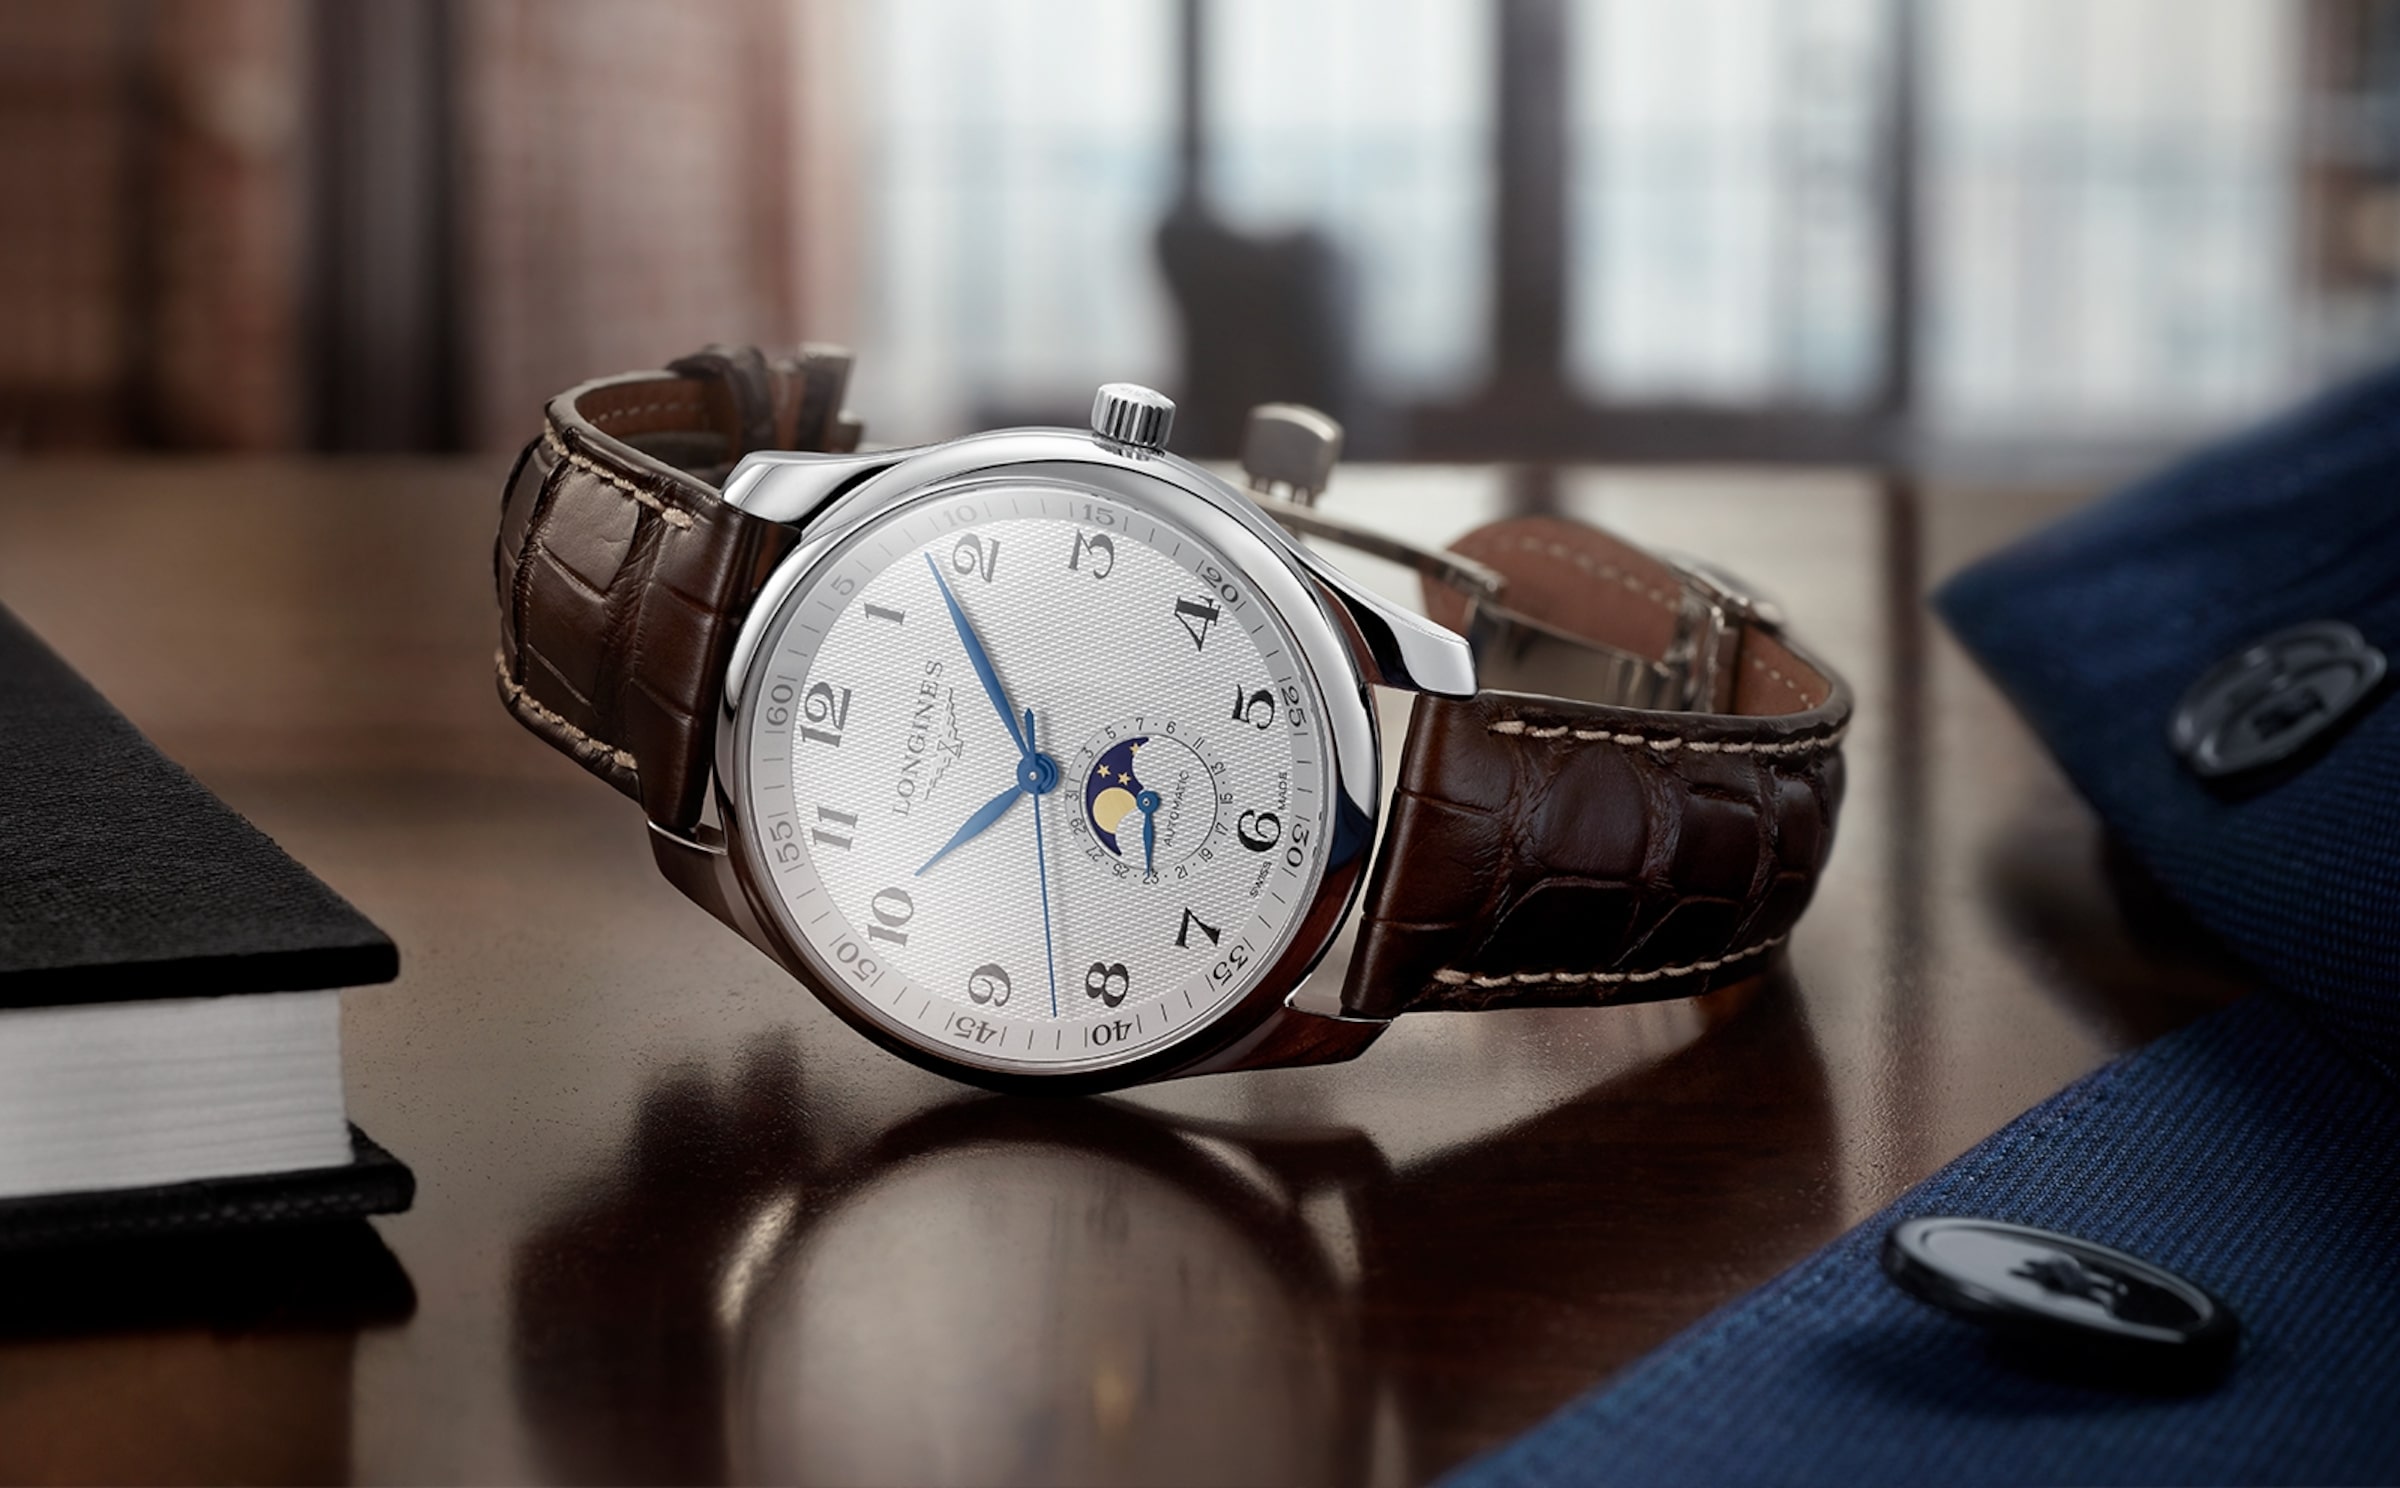 The Longines master collection